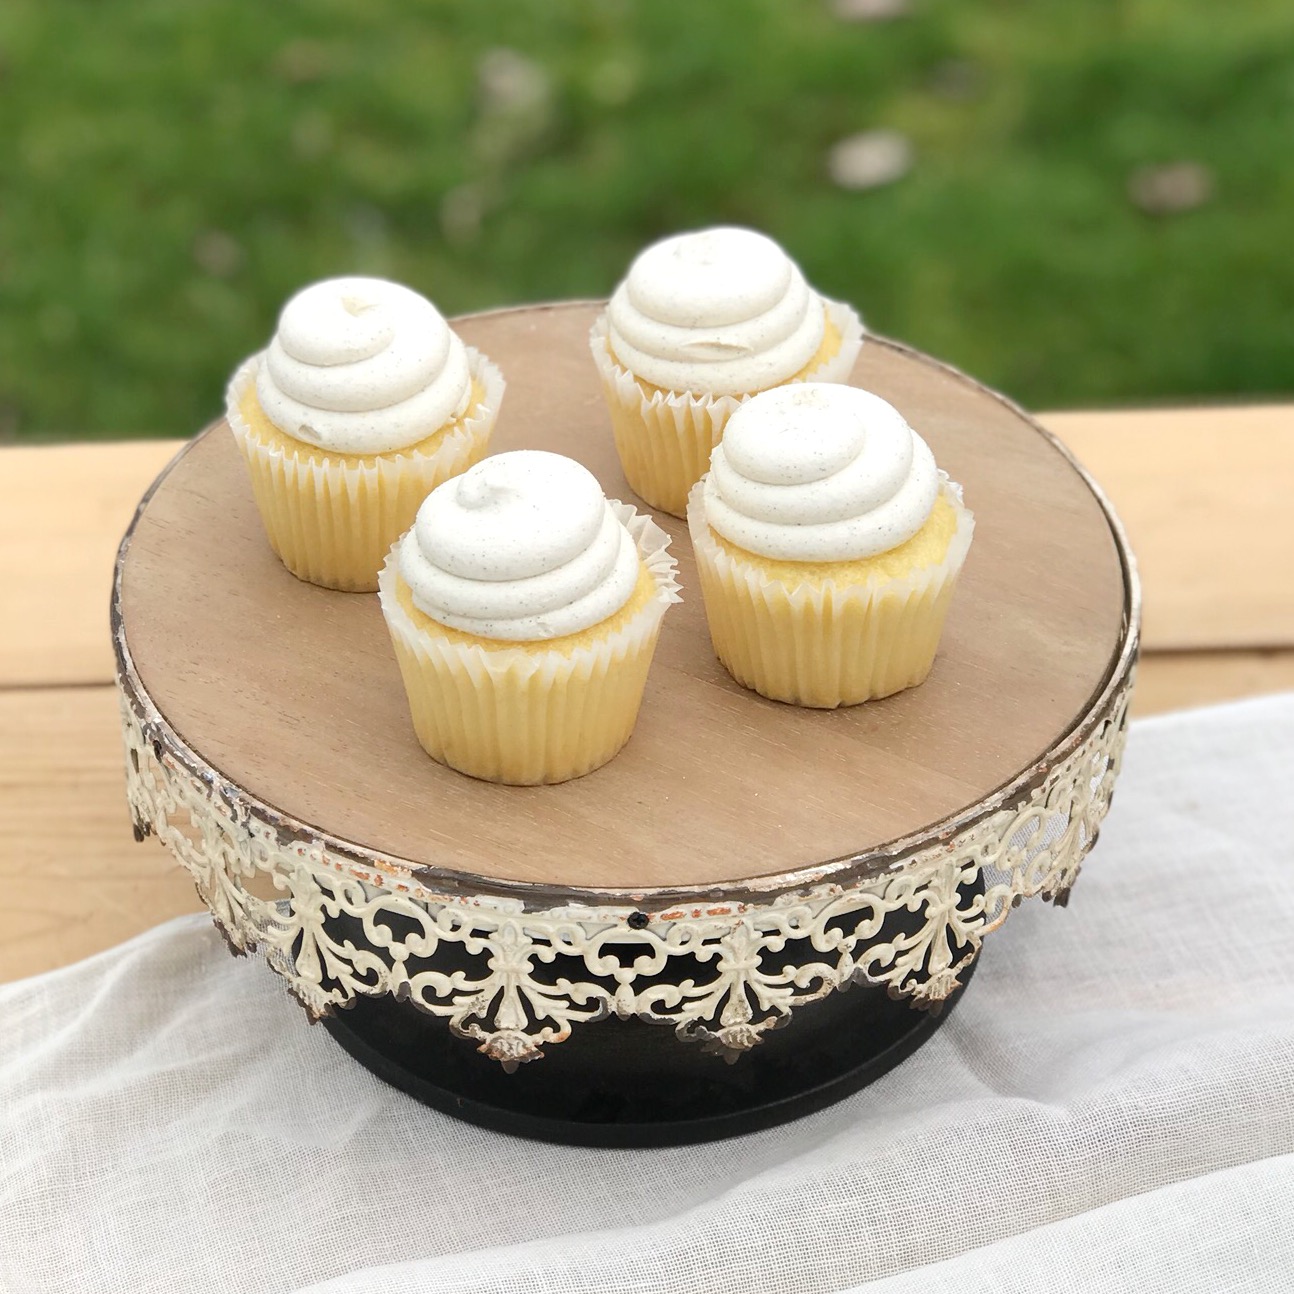 Vanilla Lavender Cupcakes Filled with Lemon Buttercream Frosting